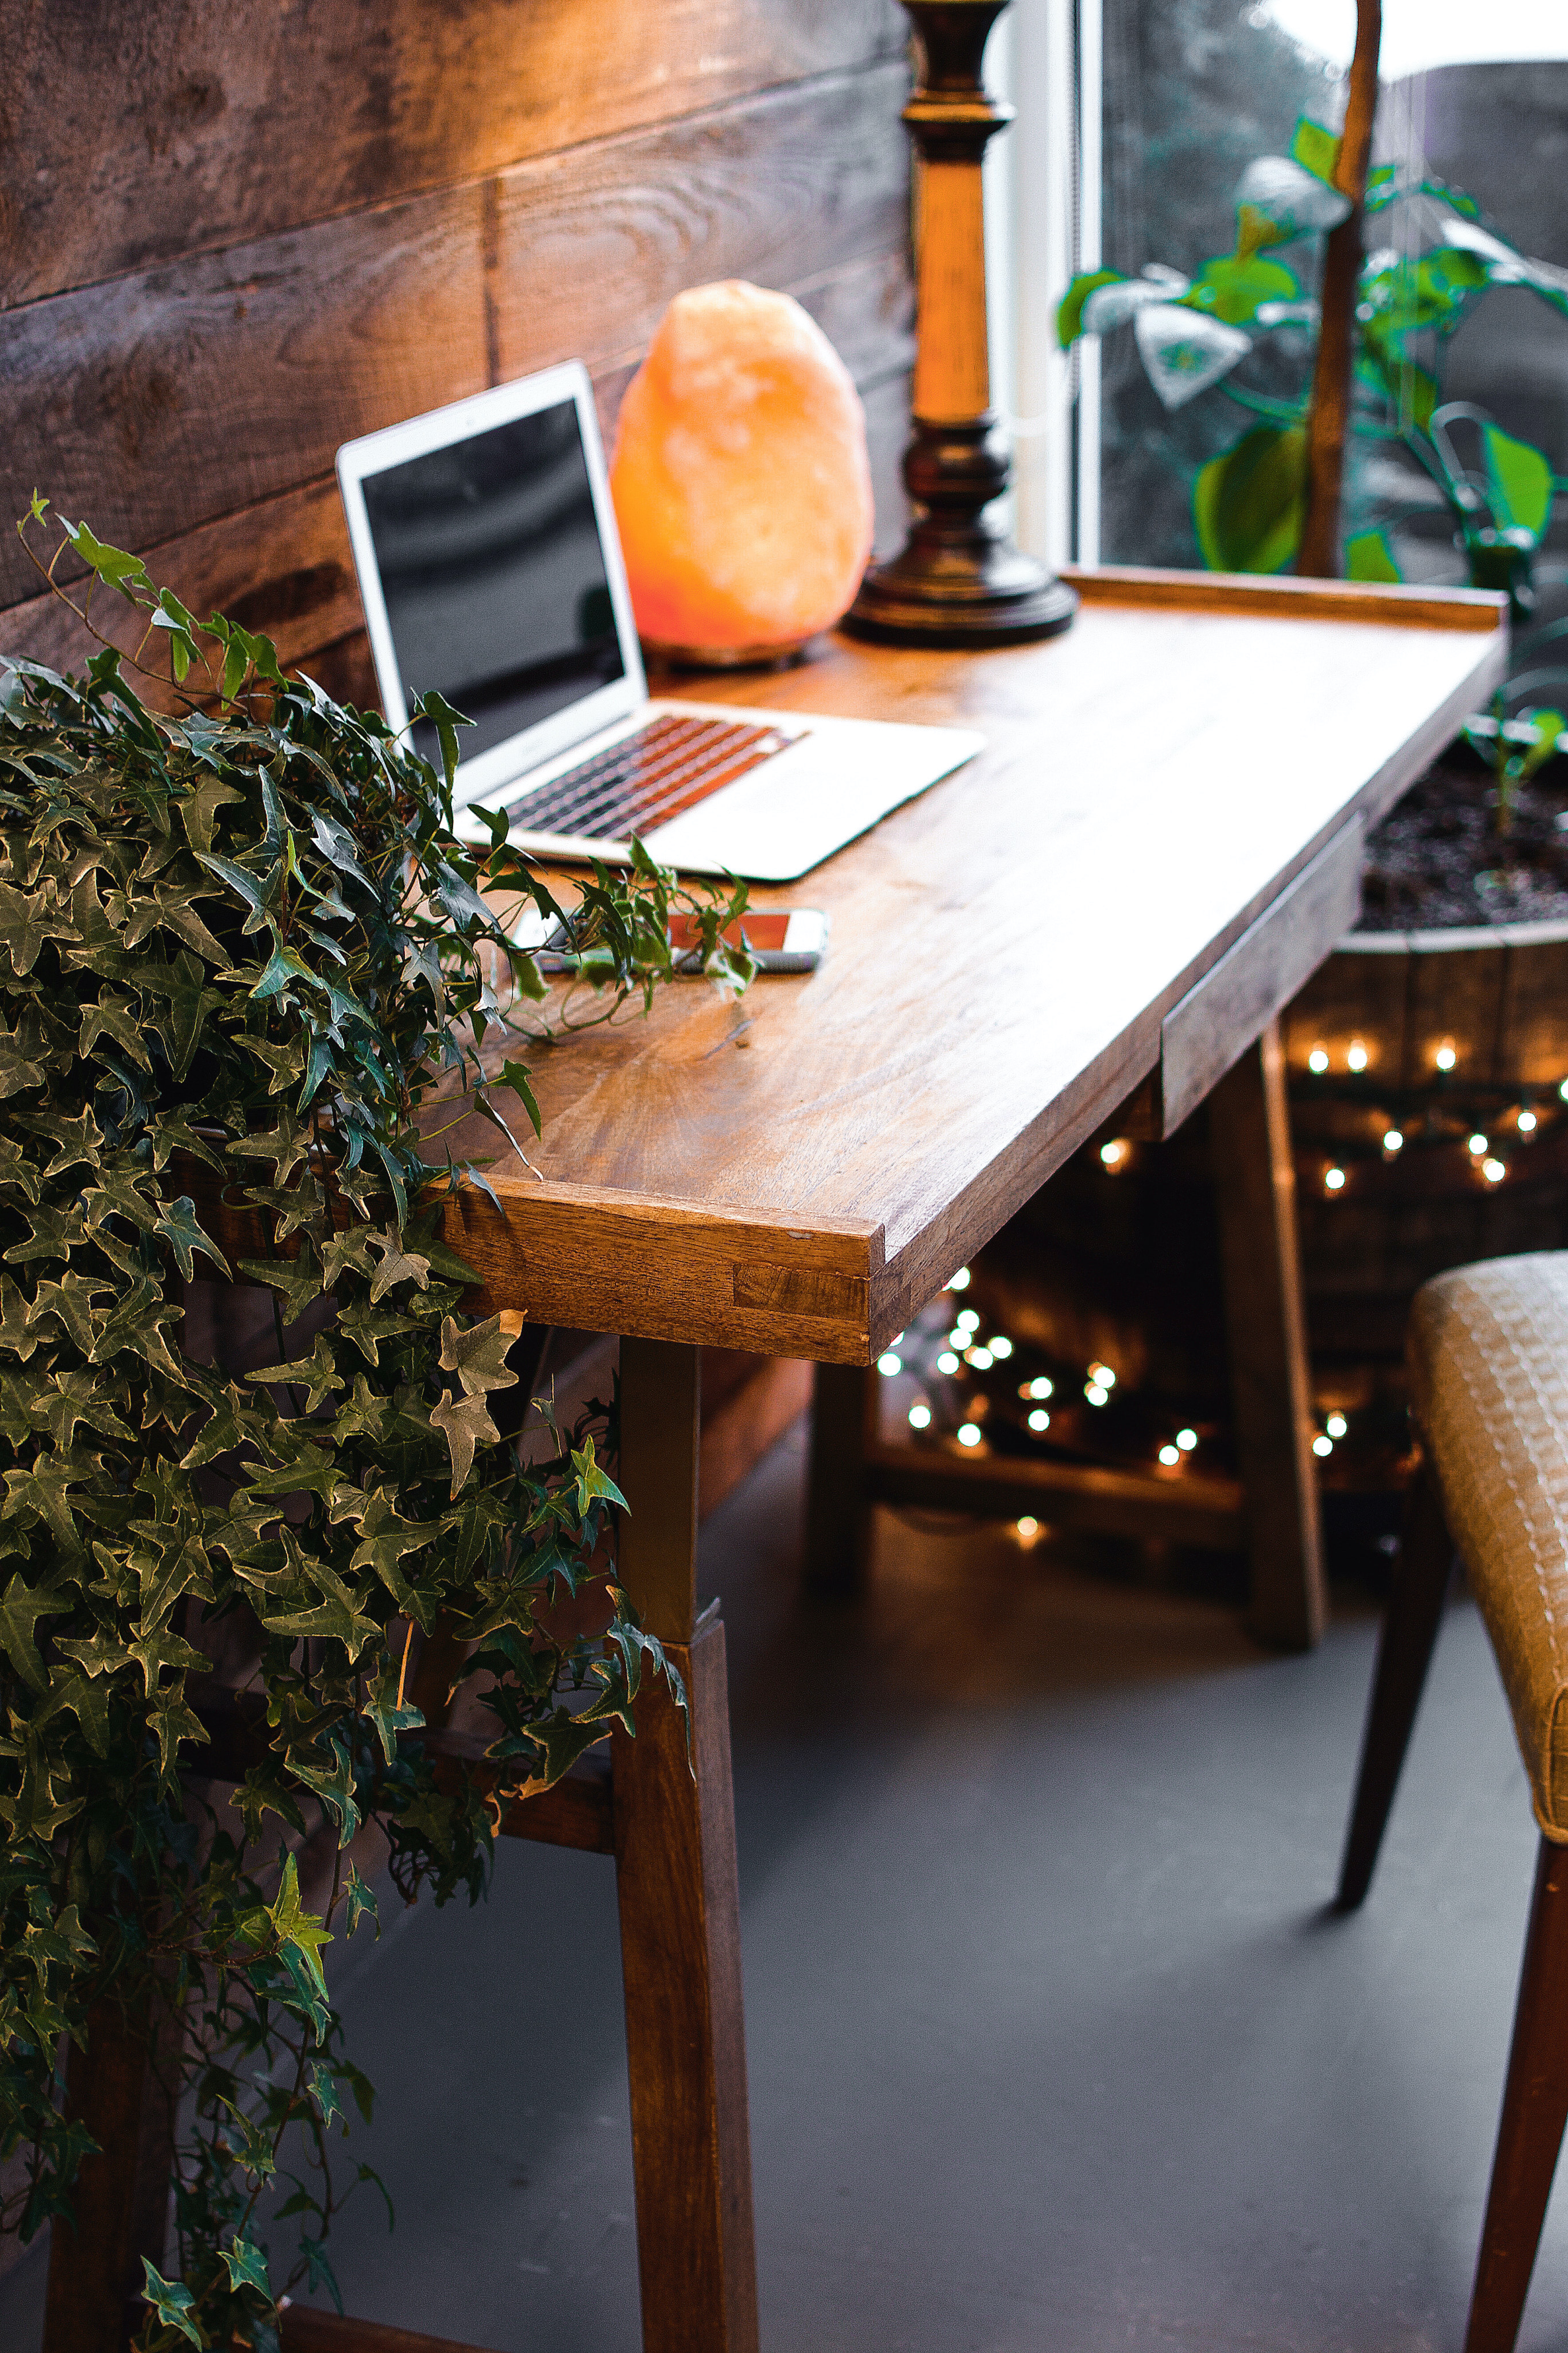 Wood writing desk with laptop and green plant